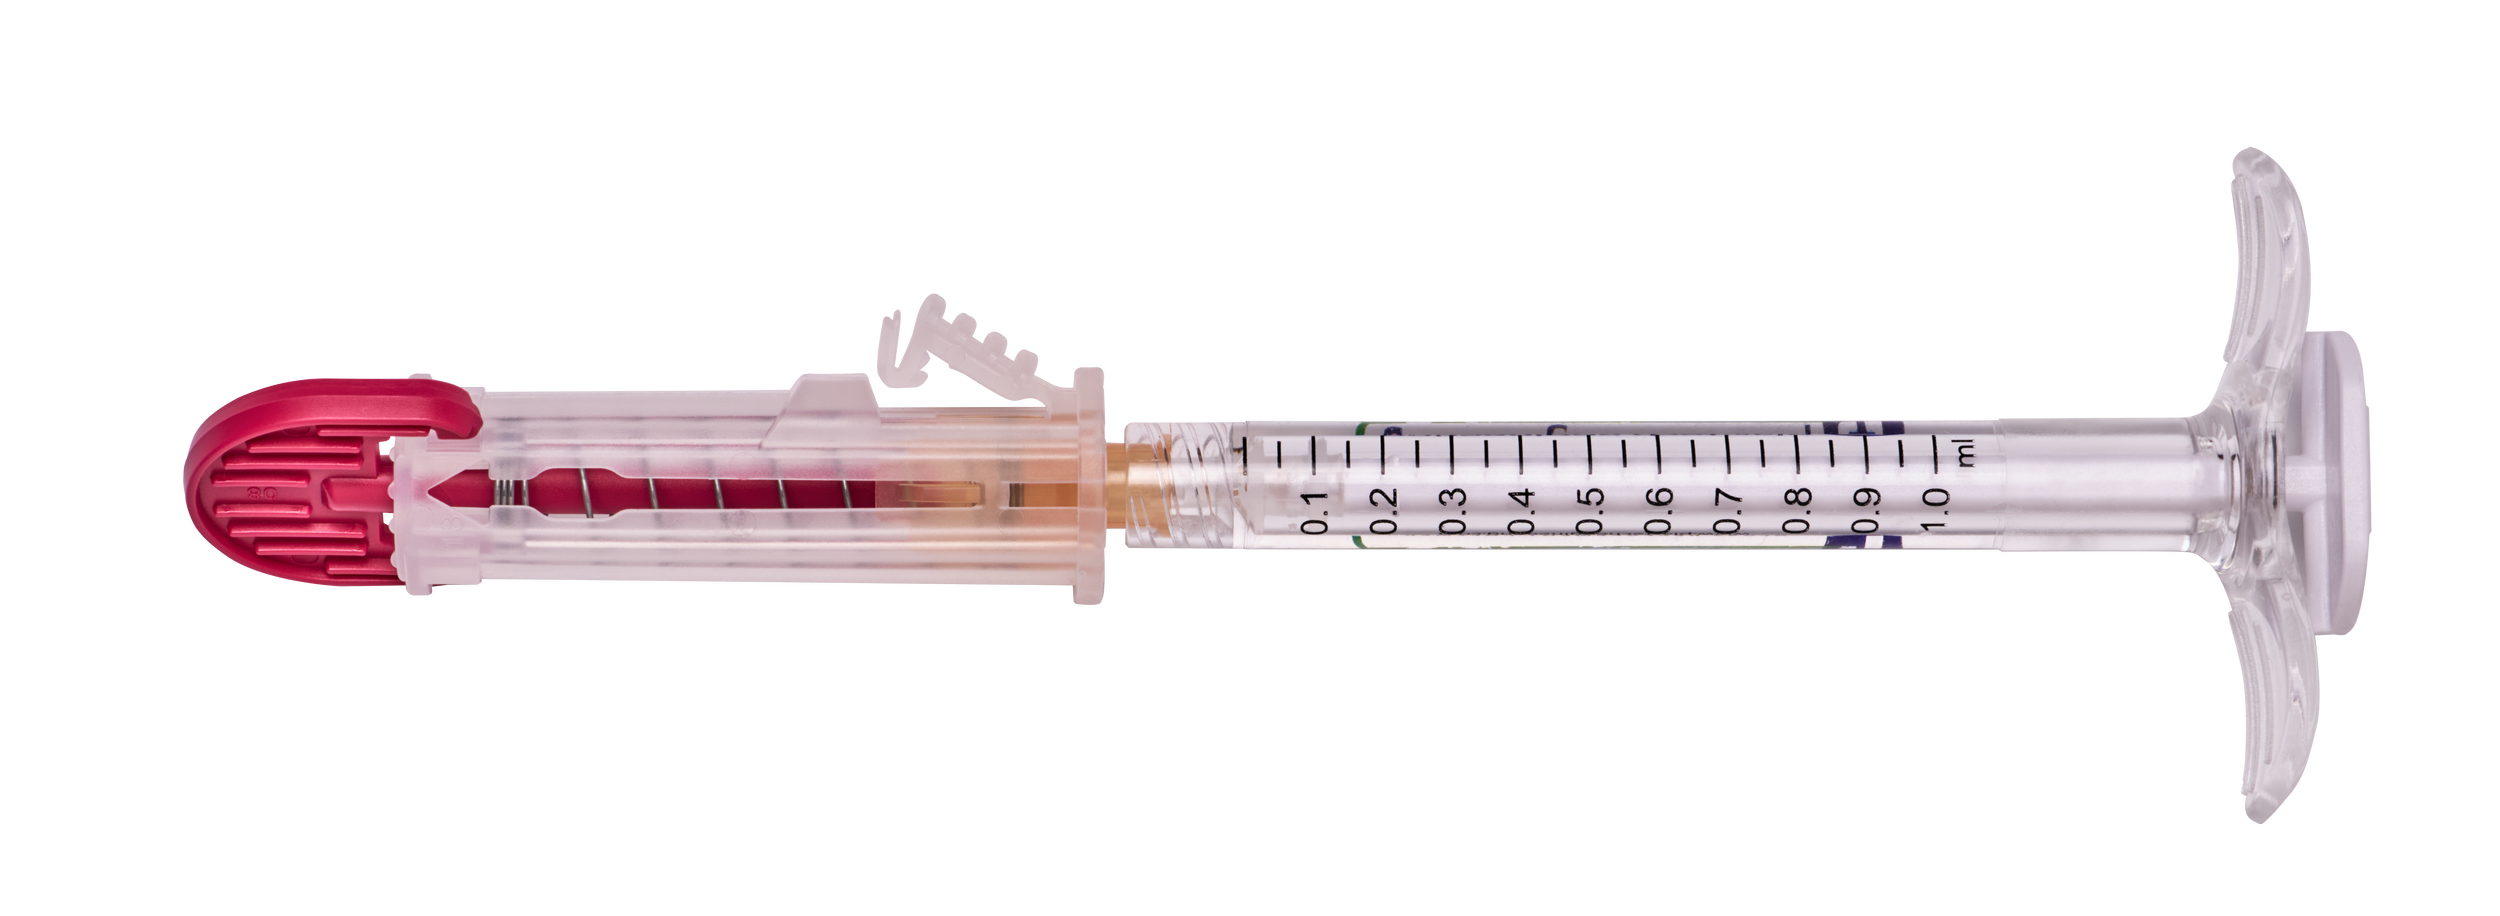 Safety Insulin Syringes — ONE-CARE™